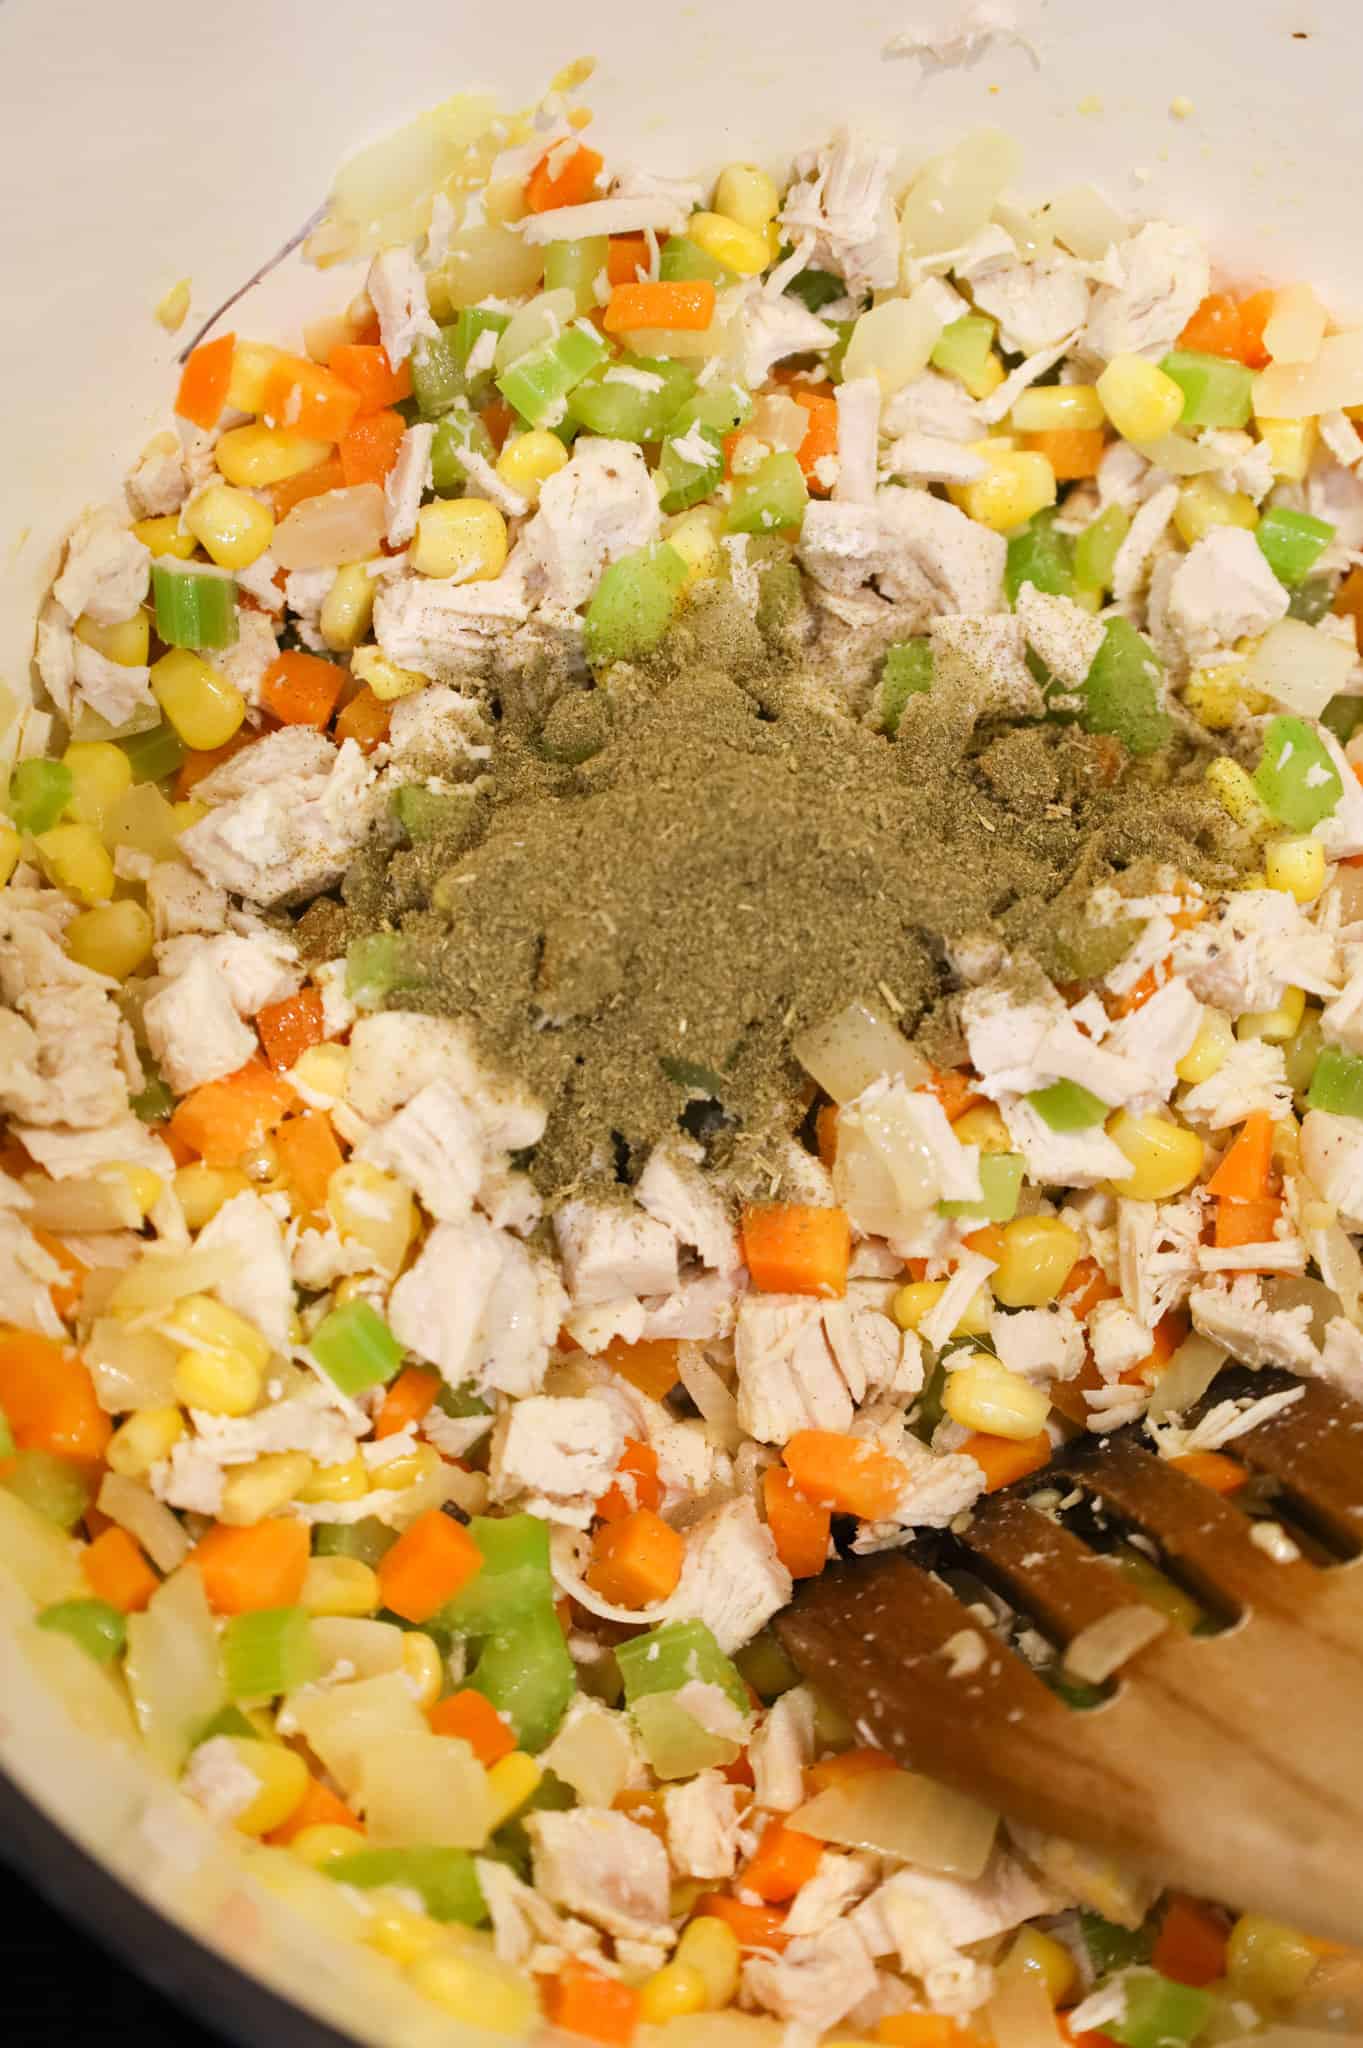 poultry seasoning added to pot with chopped chicken and veggies